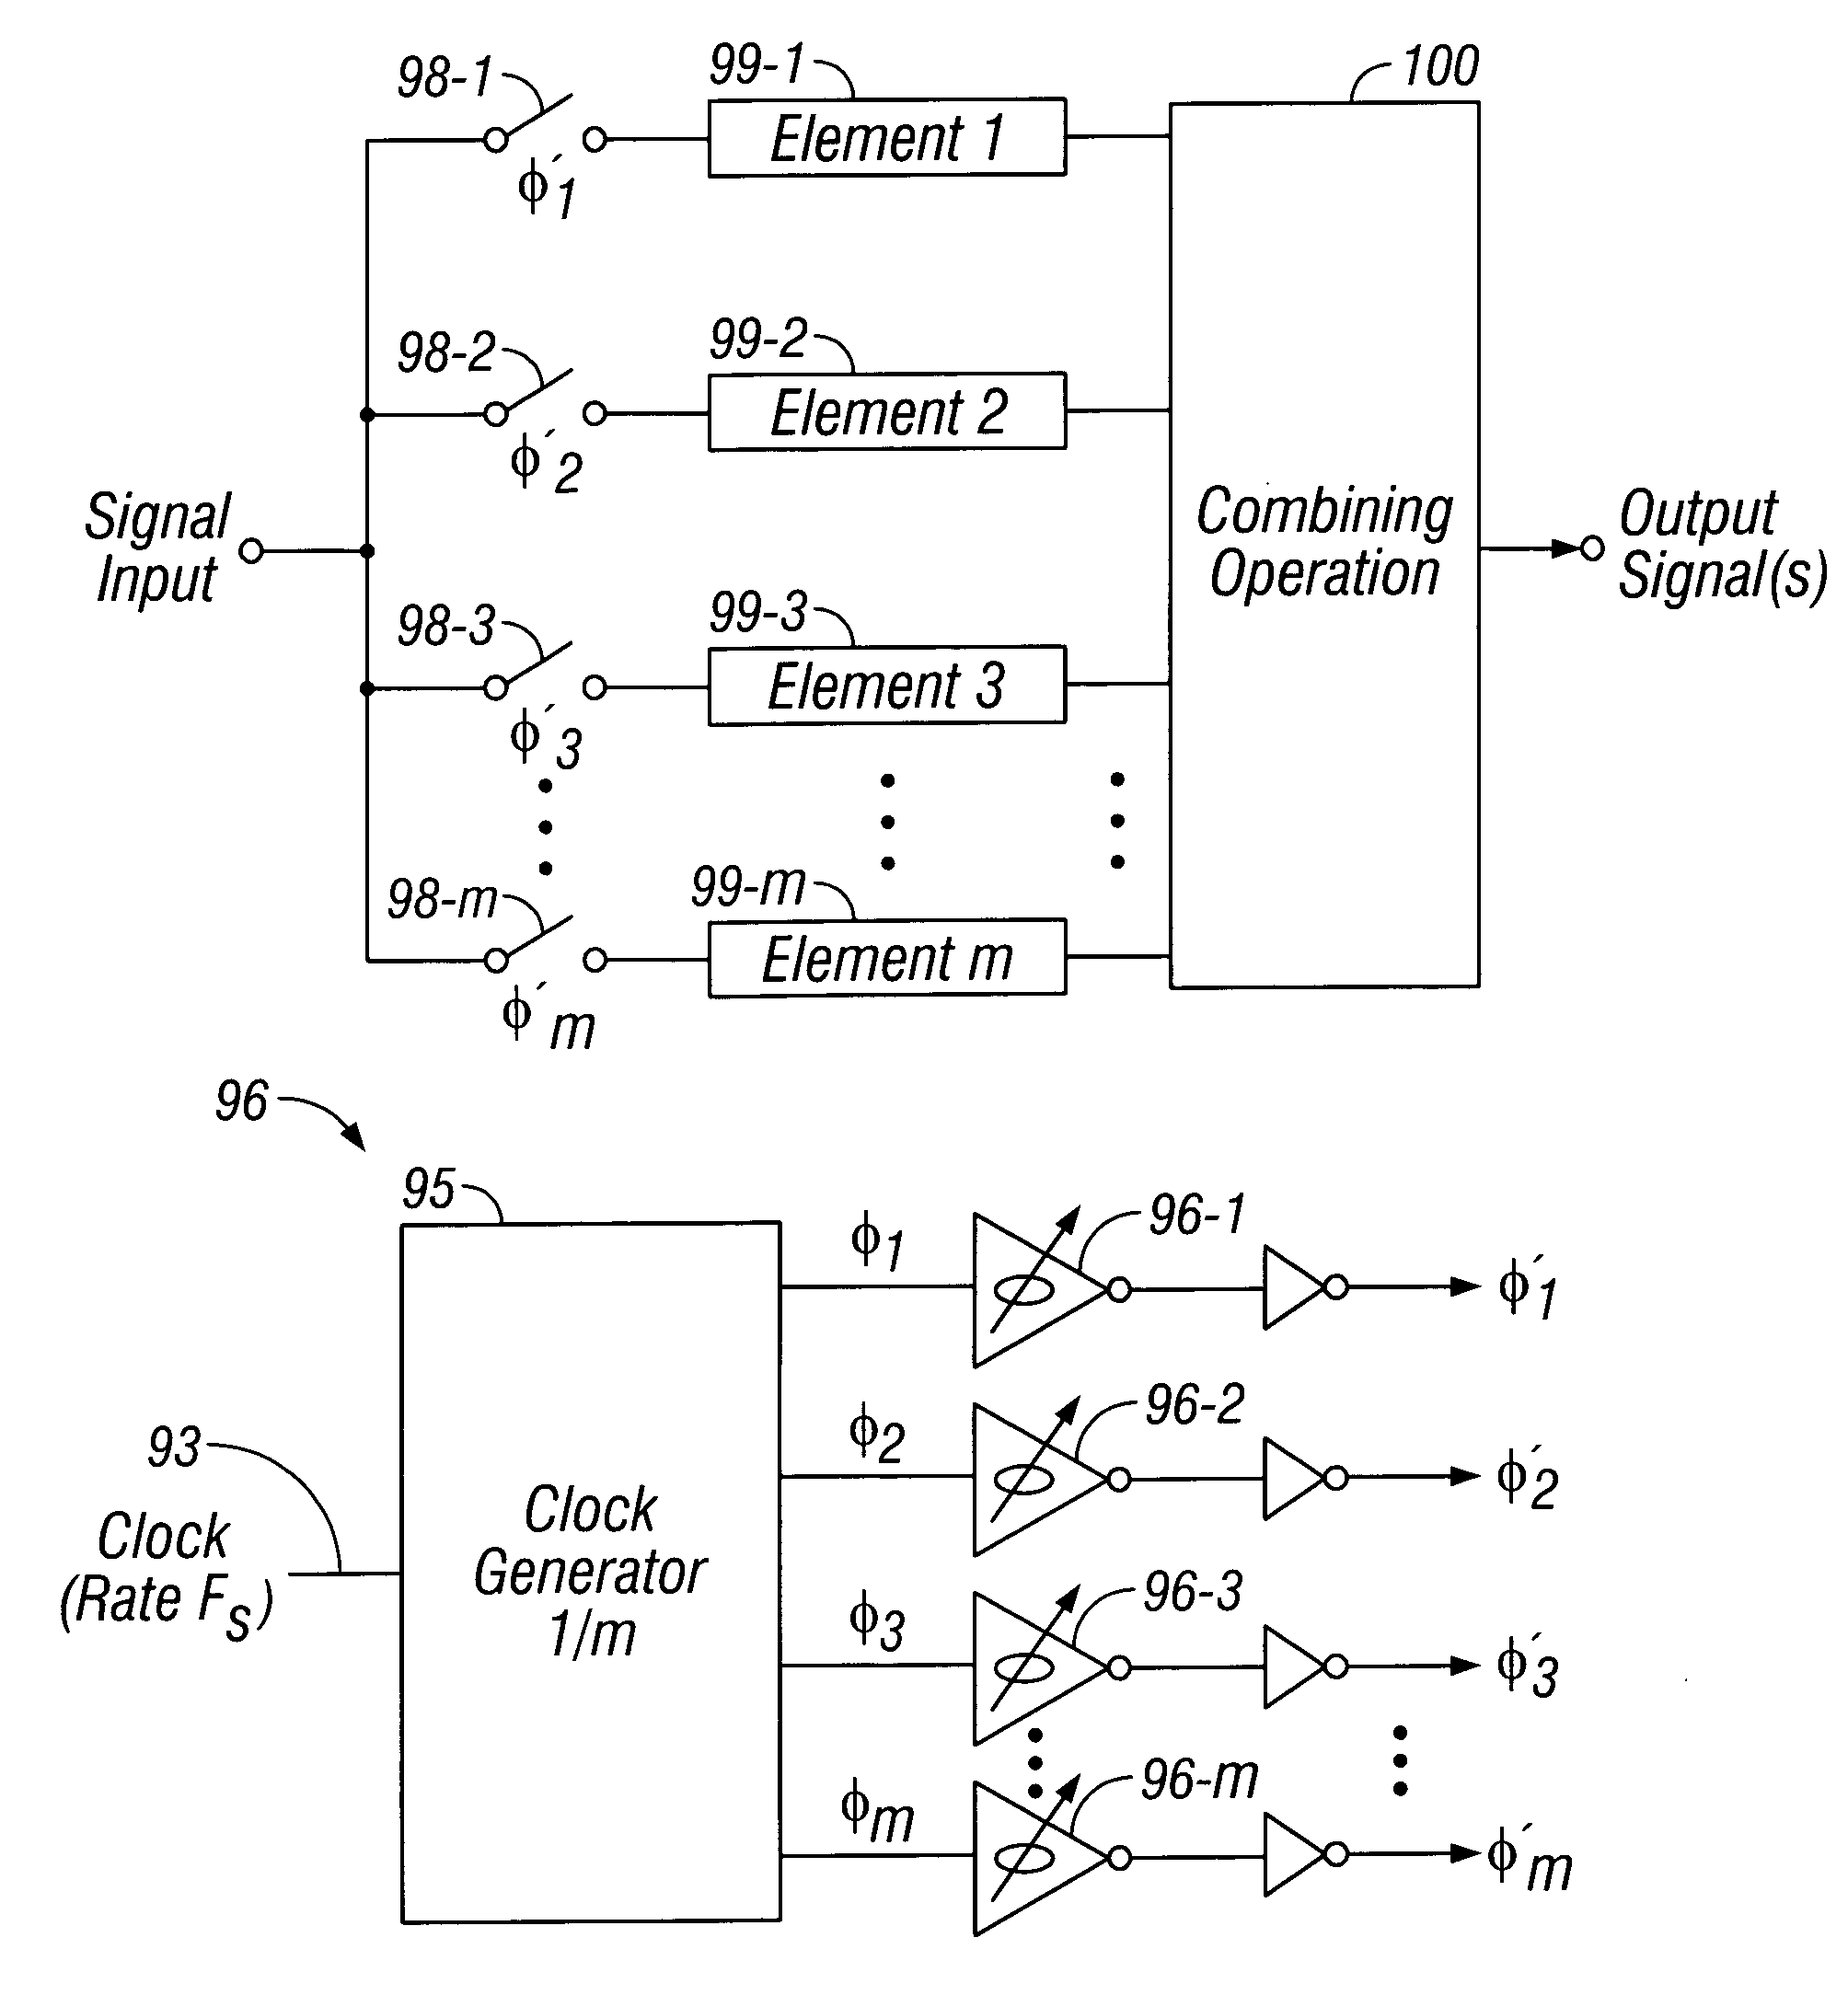 Use of analog-valued floating-gate transistors to match the electrical characteristics of interleaved and pipelined circuits